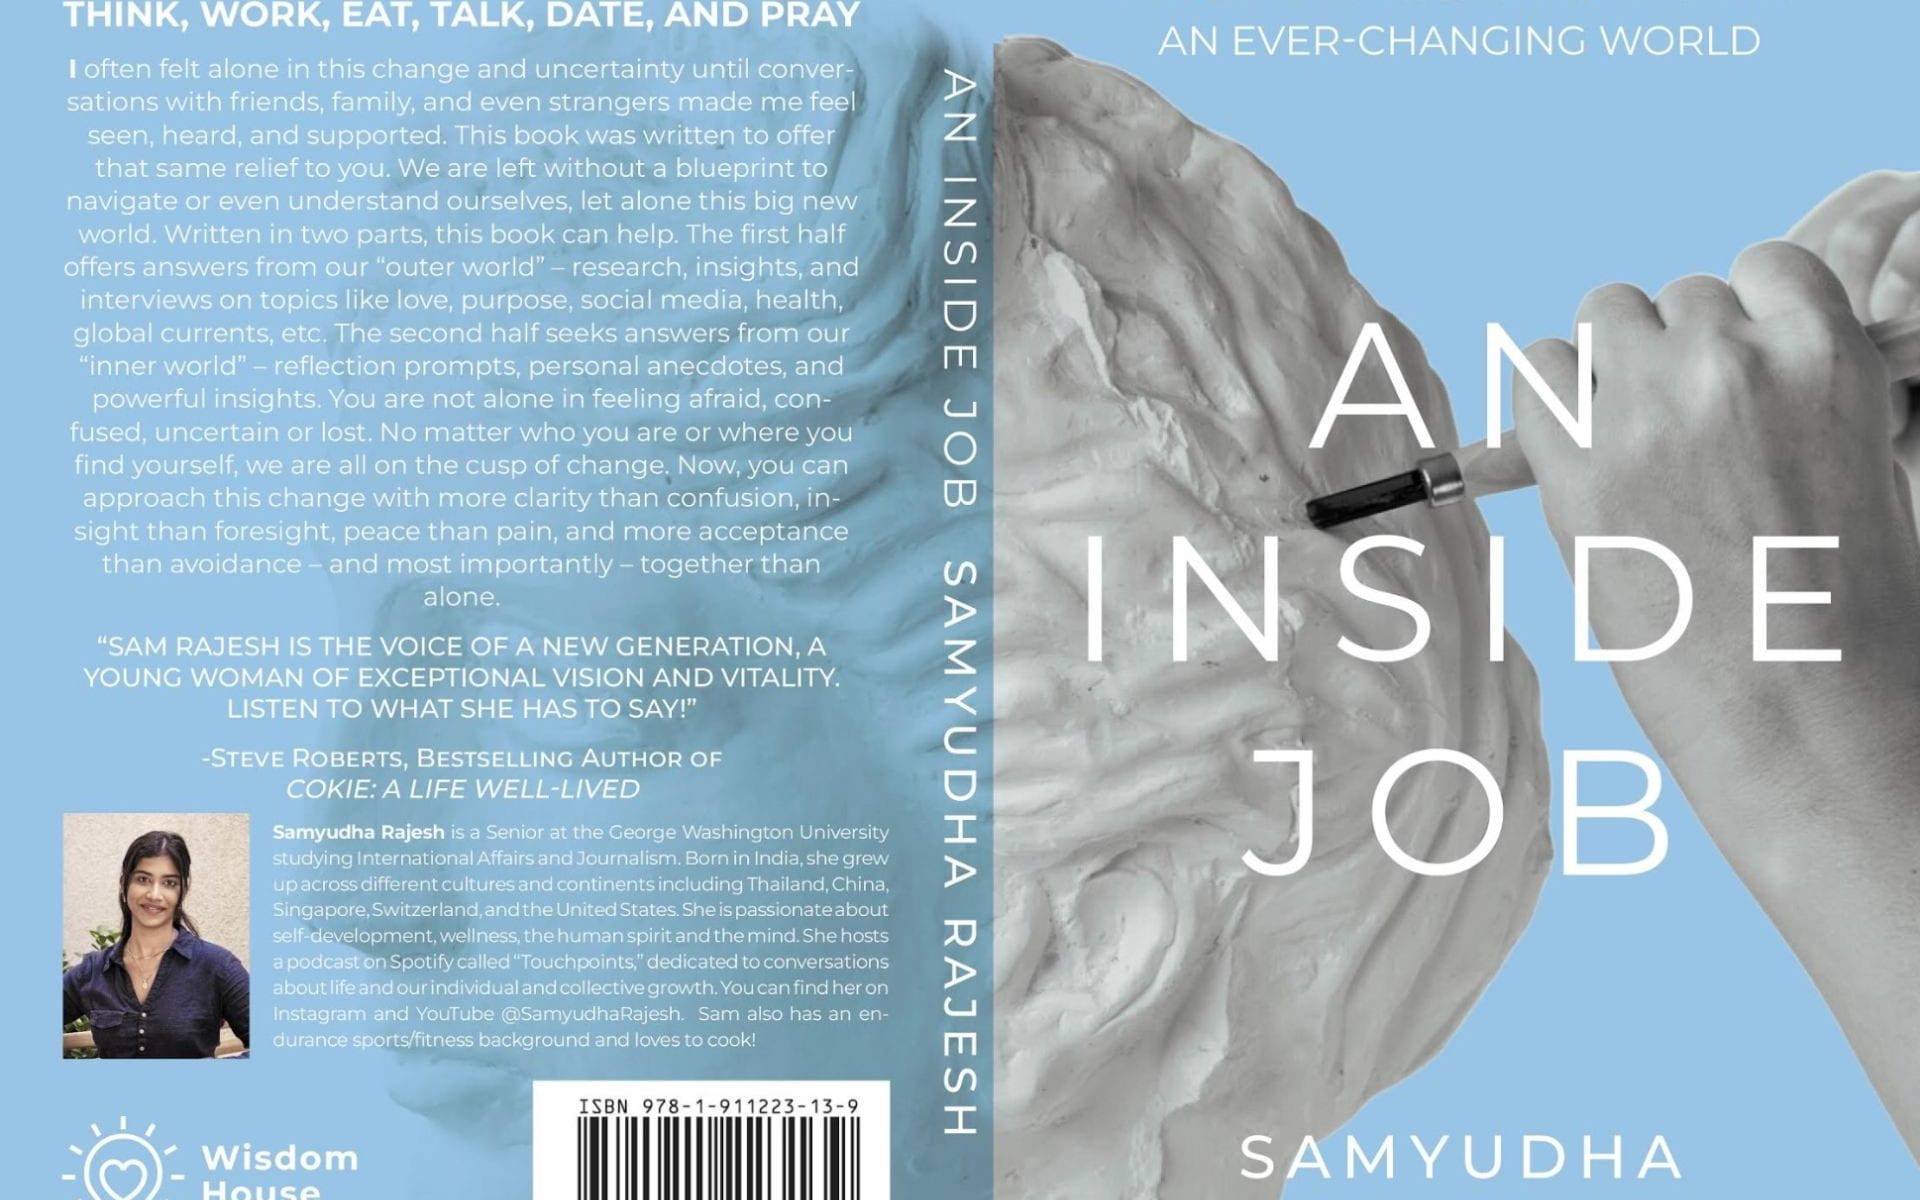 “An Inside Job: A Guide to Self-discovery in an Ever-Changing World" by Samyudha Rajesh